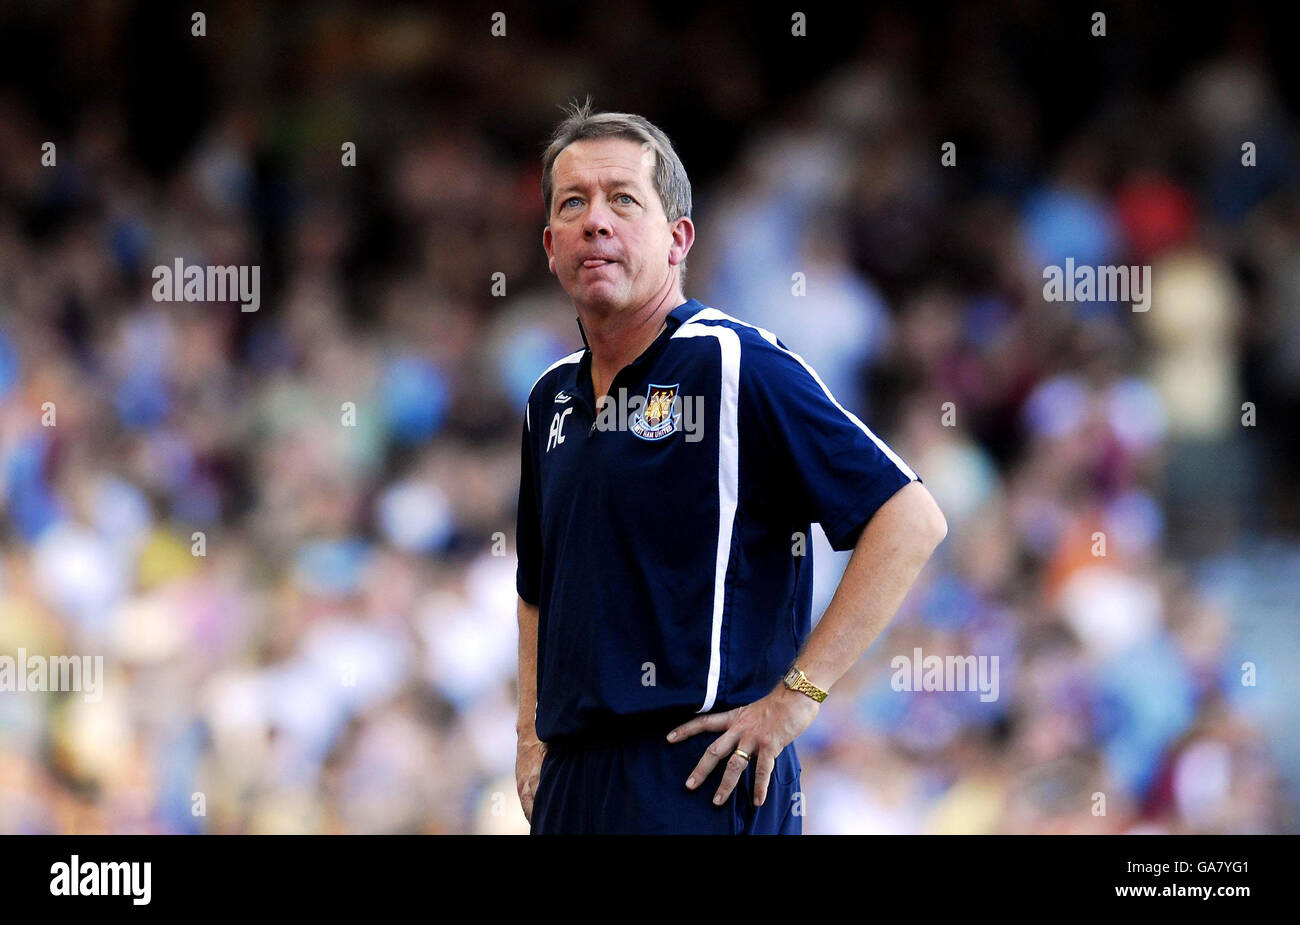 West Ham manager Alan Curbishley during the Barclays Premier League match at Upton Park, London. Stock Photo